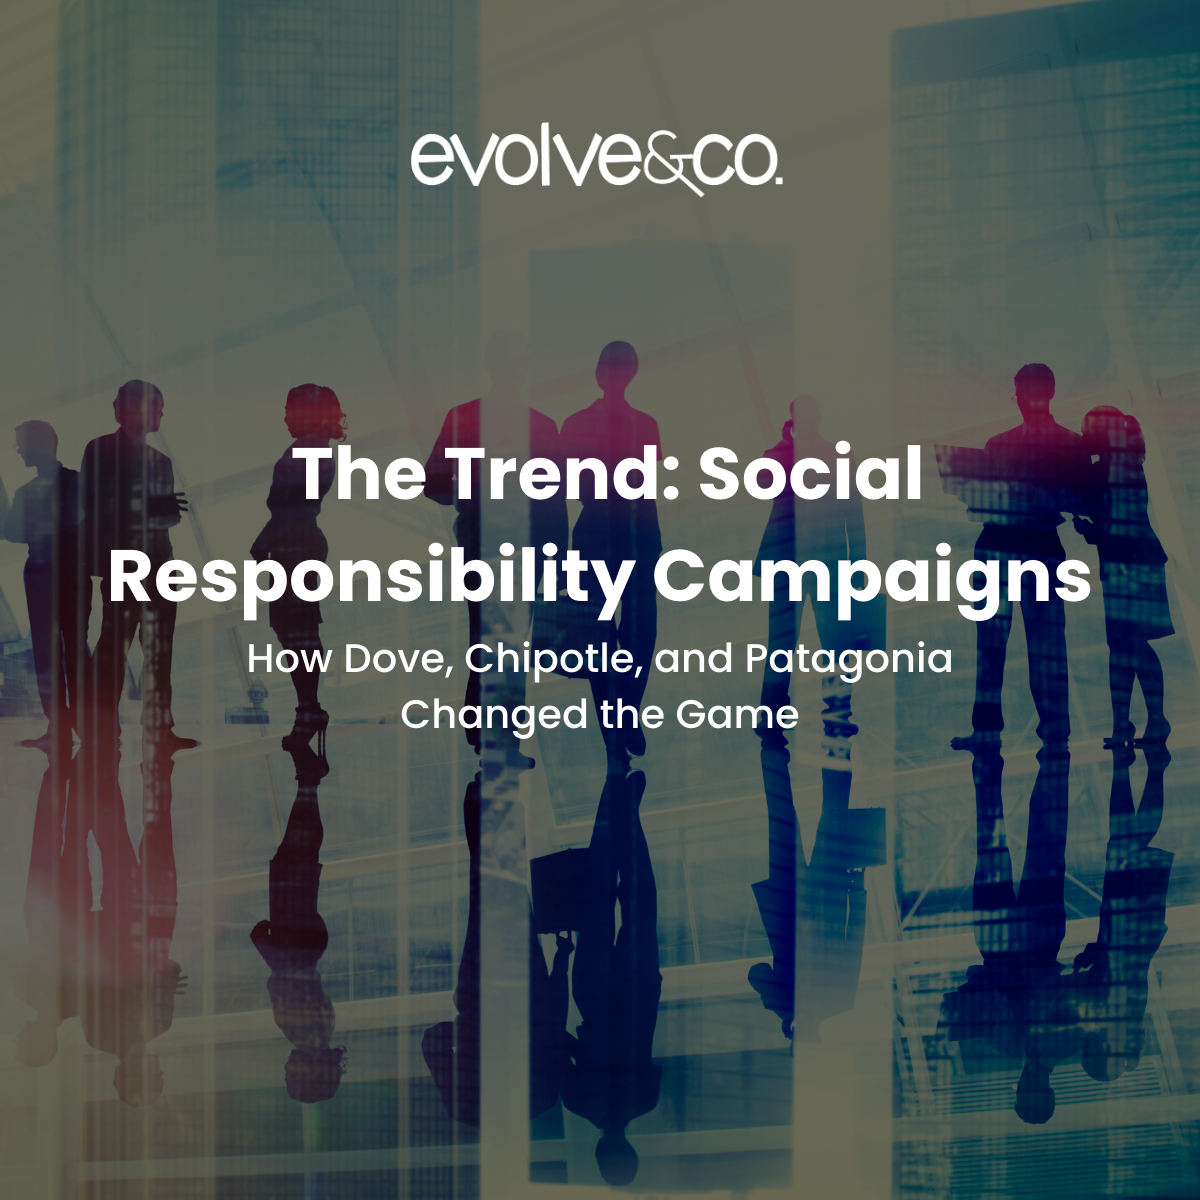 The Trend: Social Responsibility Campaigns